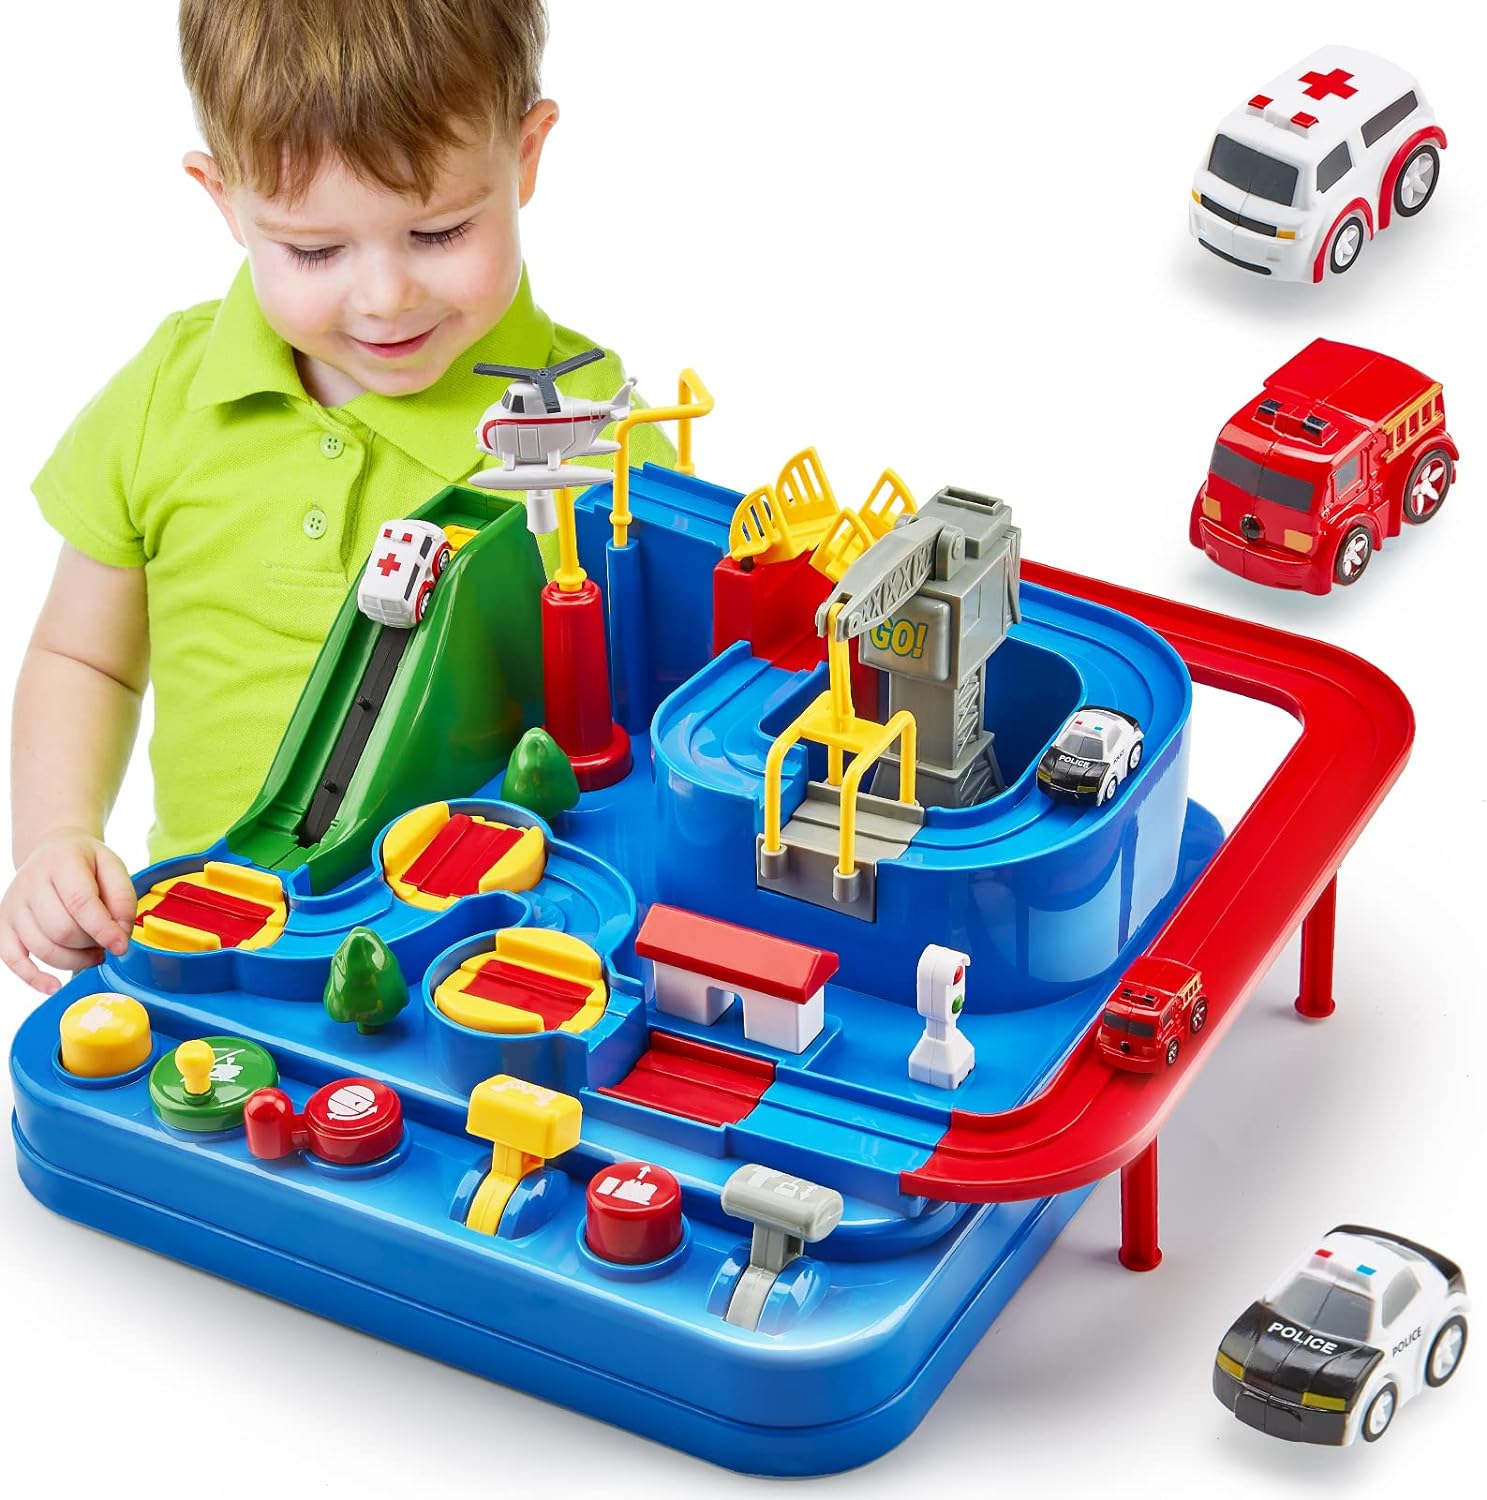 Don't Miss Your Chance to Save on CubicFun Toys for 3 Year Old Boys!